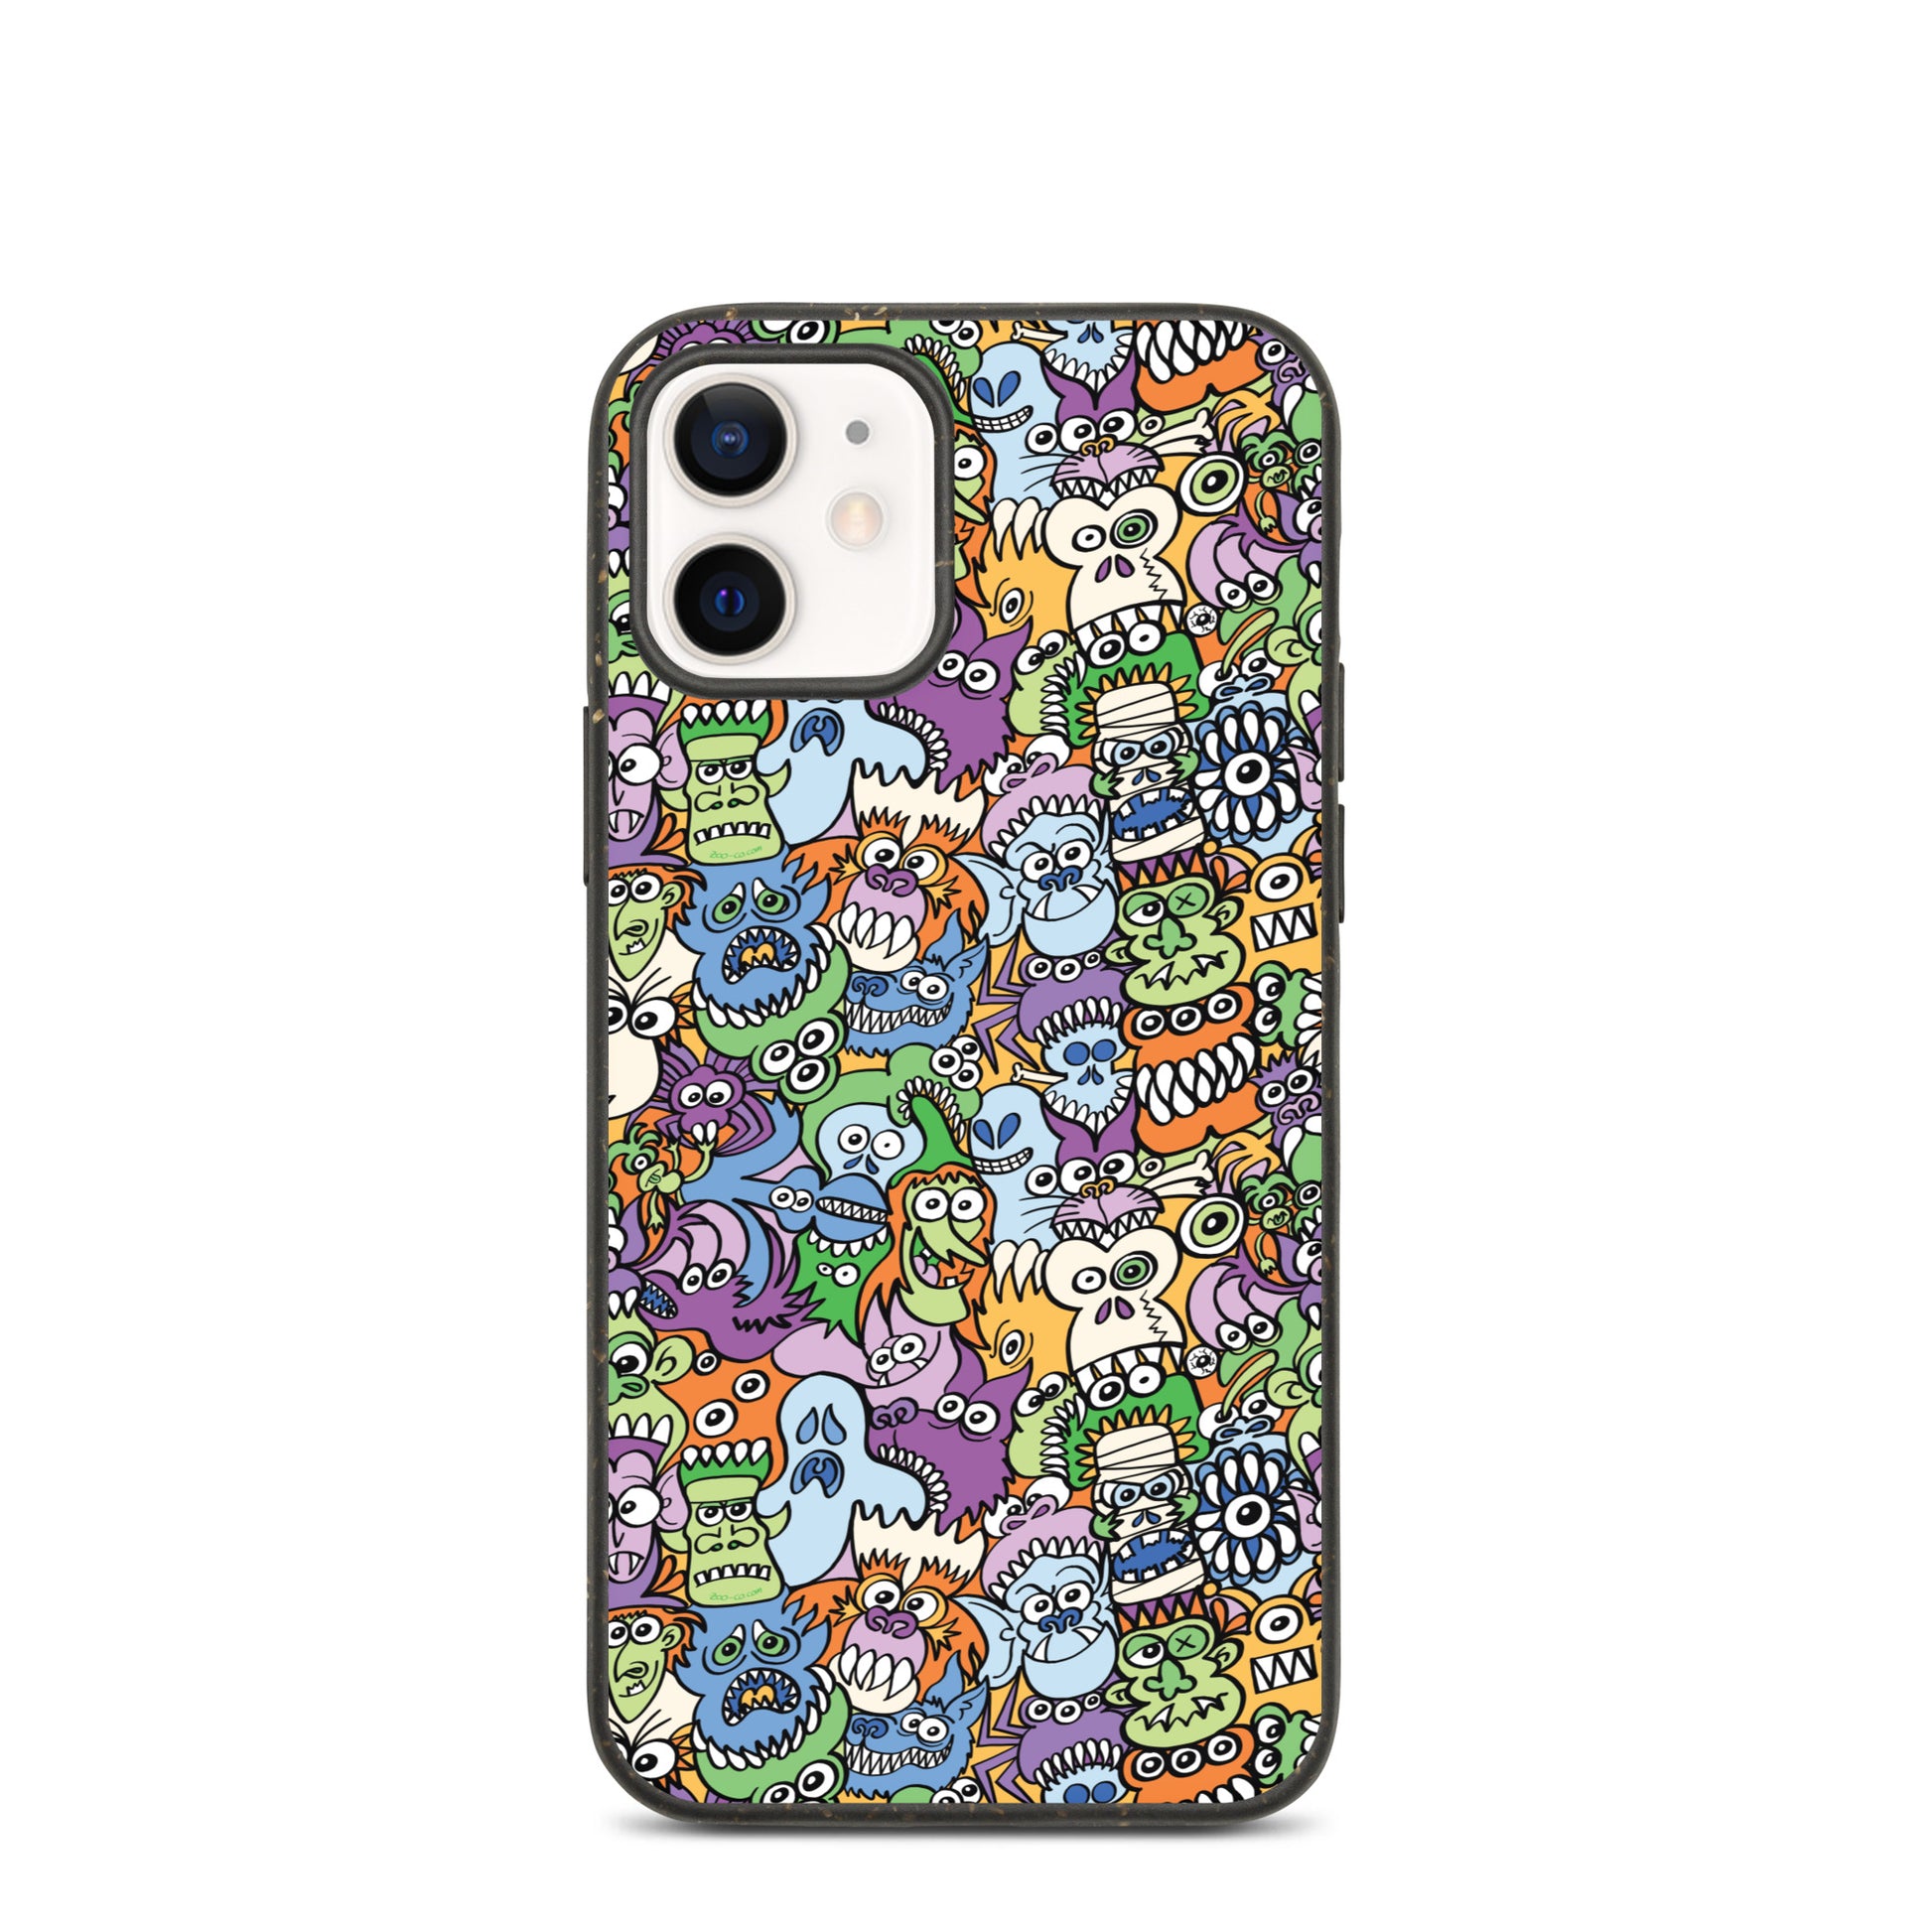 All the spooky Halloween monsters in a pattern design Speckled iPhone case. iphone 12